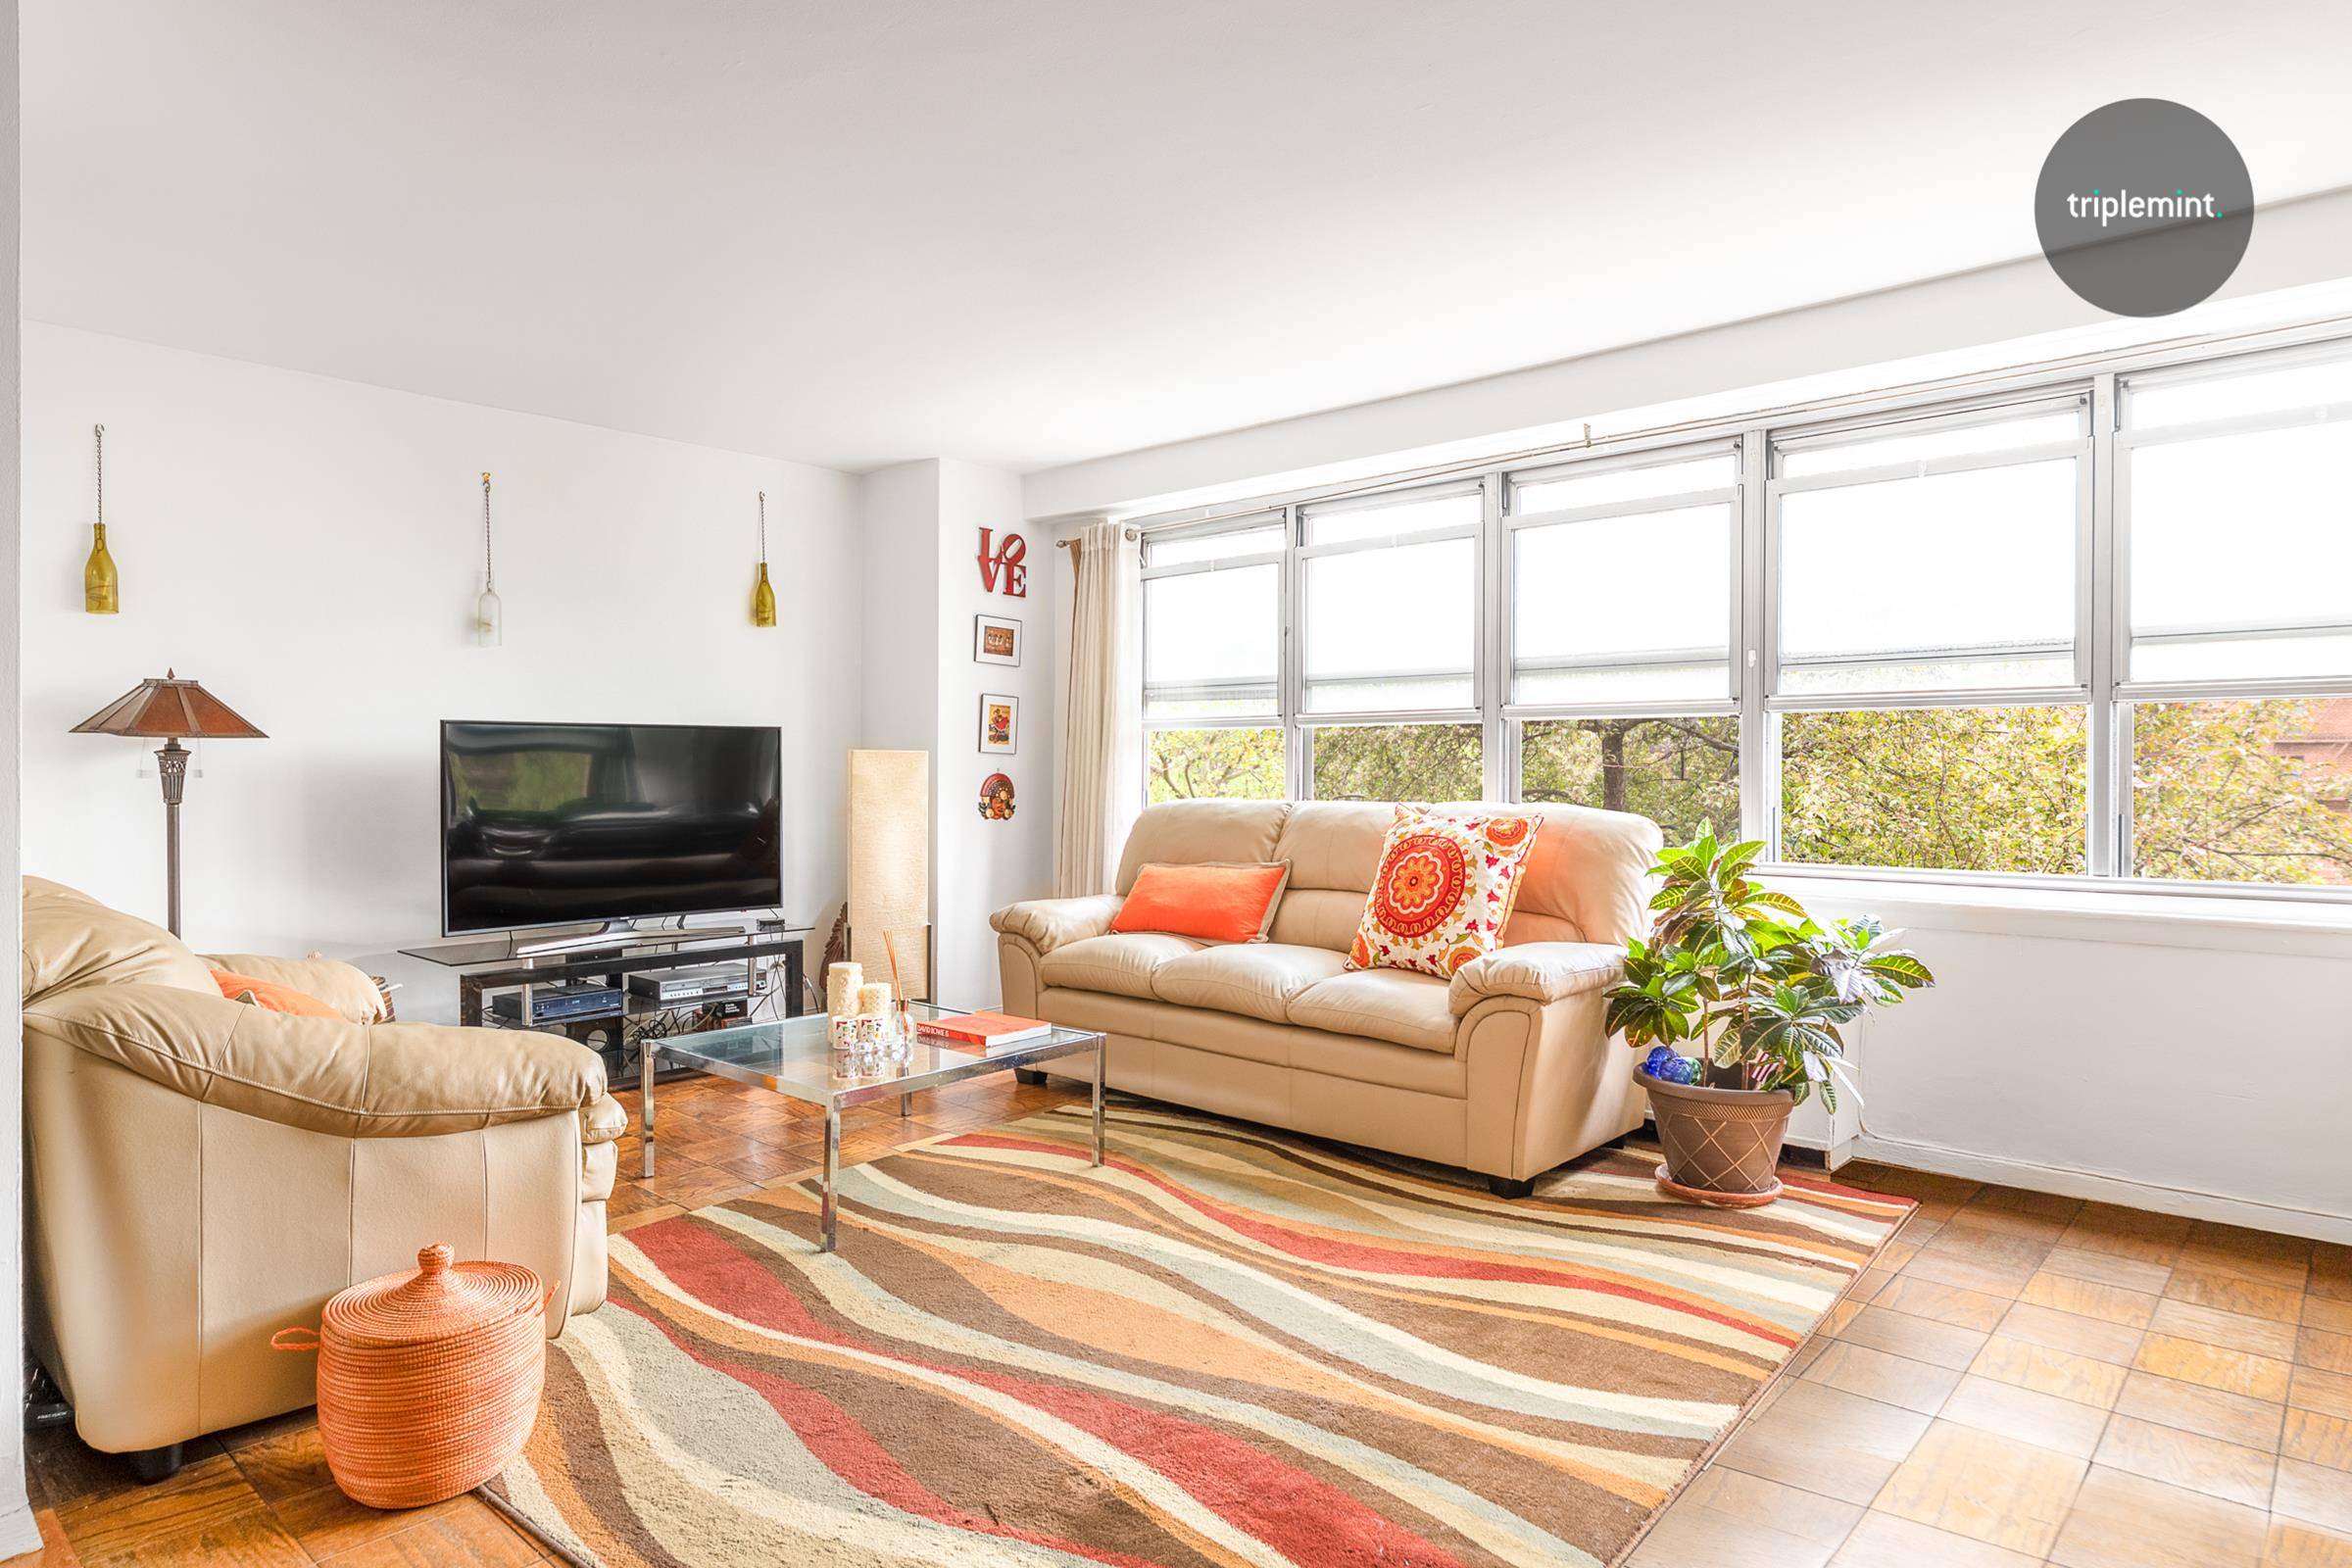 This sun drenched one bedroom features a king size bedroom and a spacious living room with additional dining space that can be easily converted into a second bedroom.